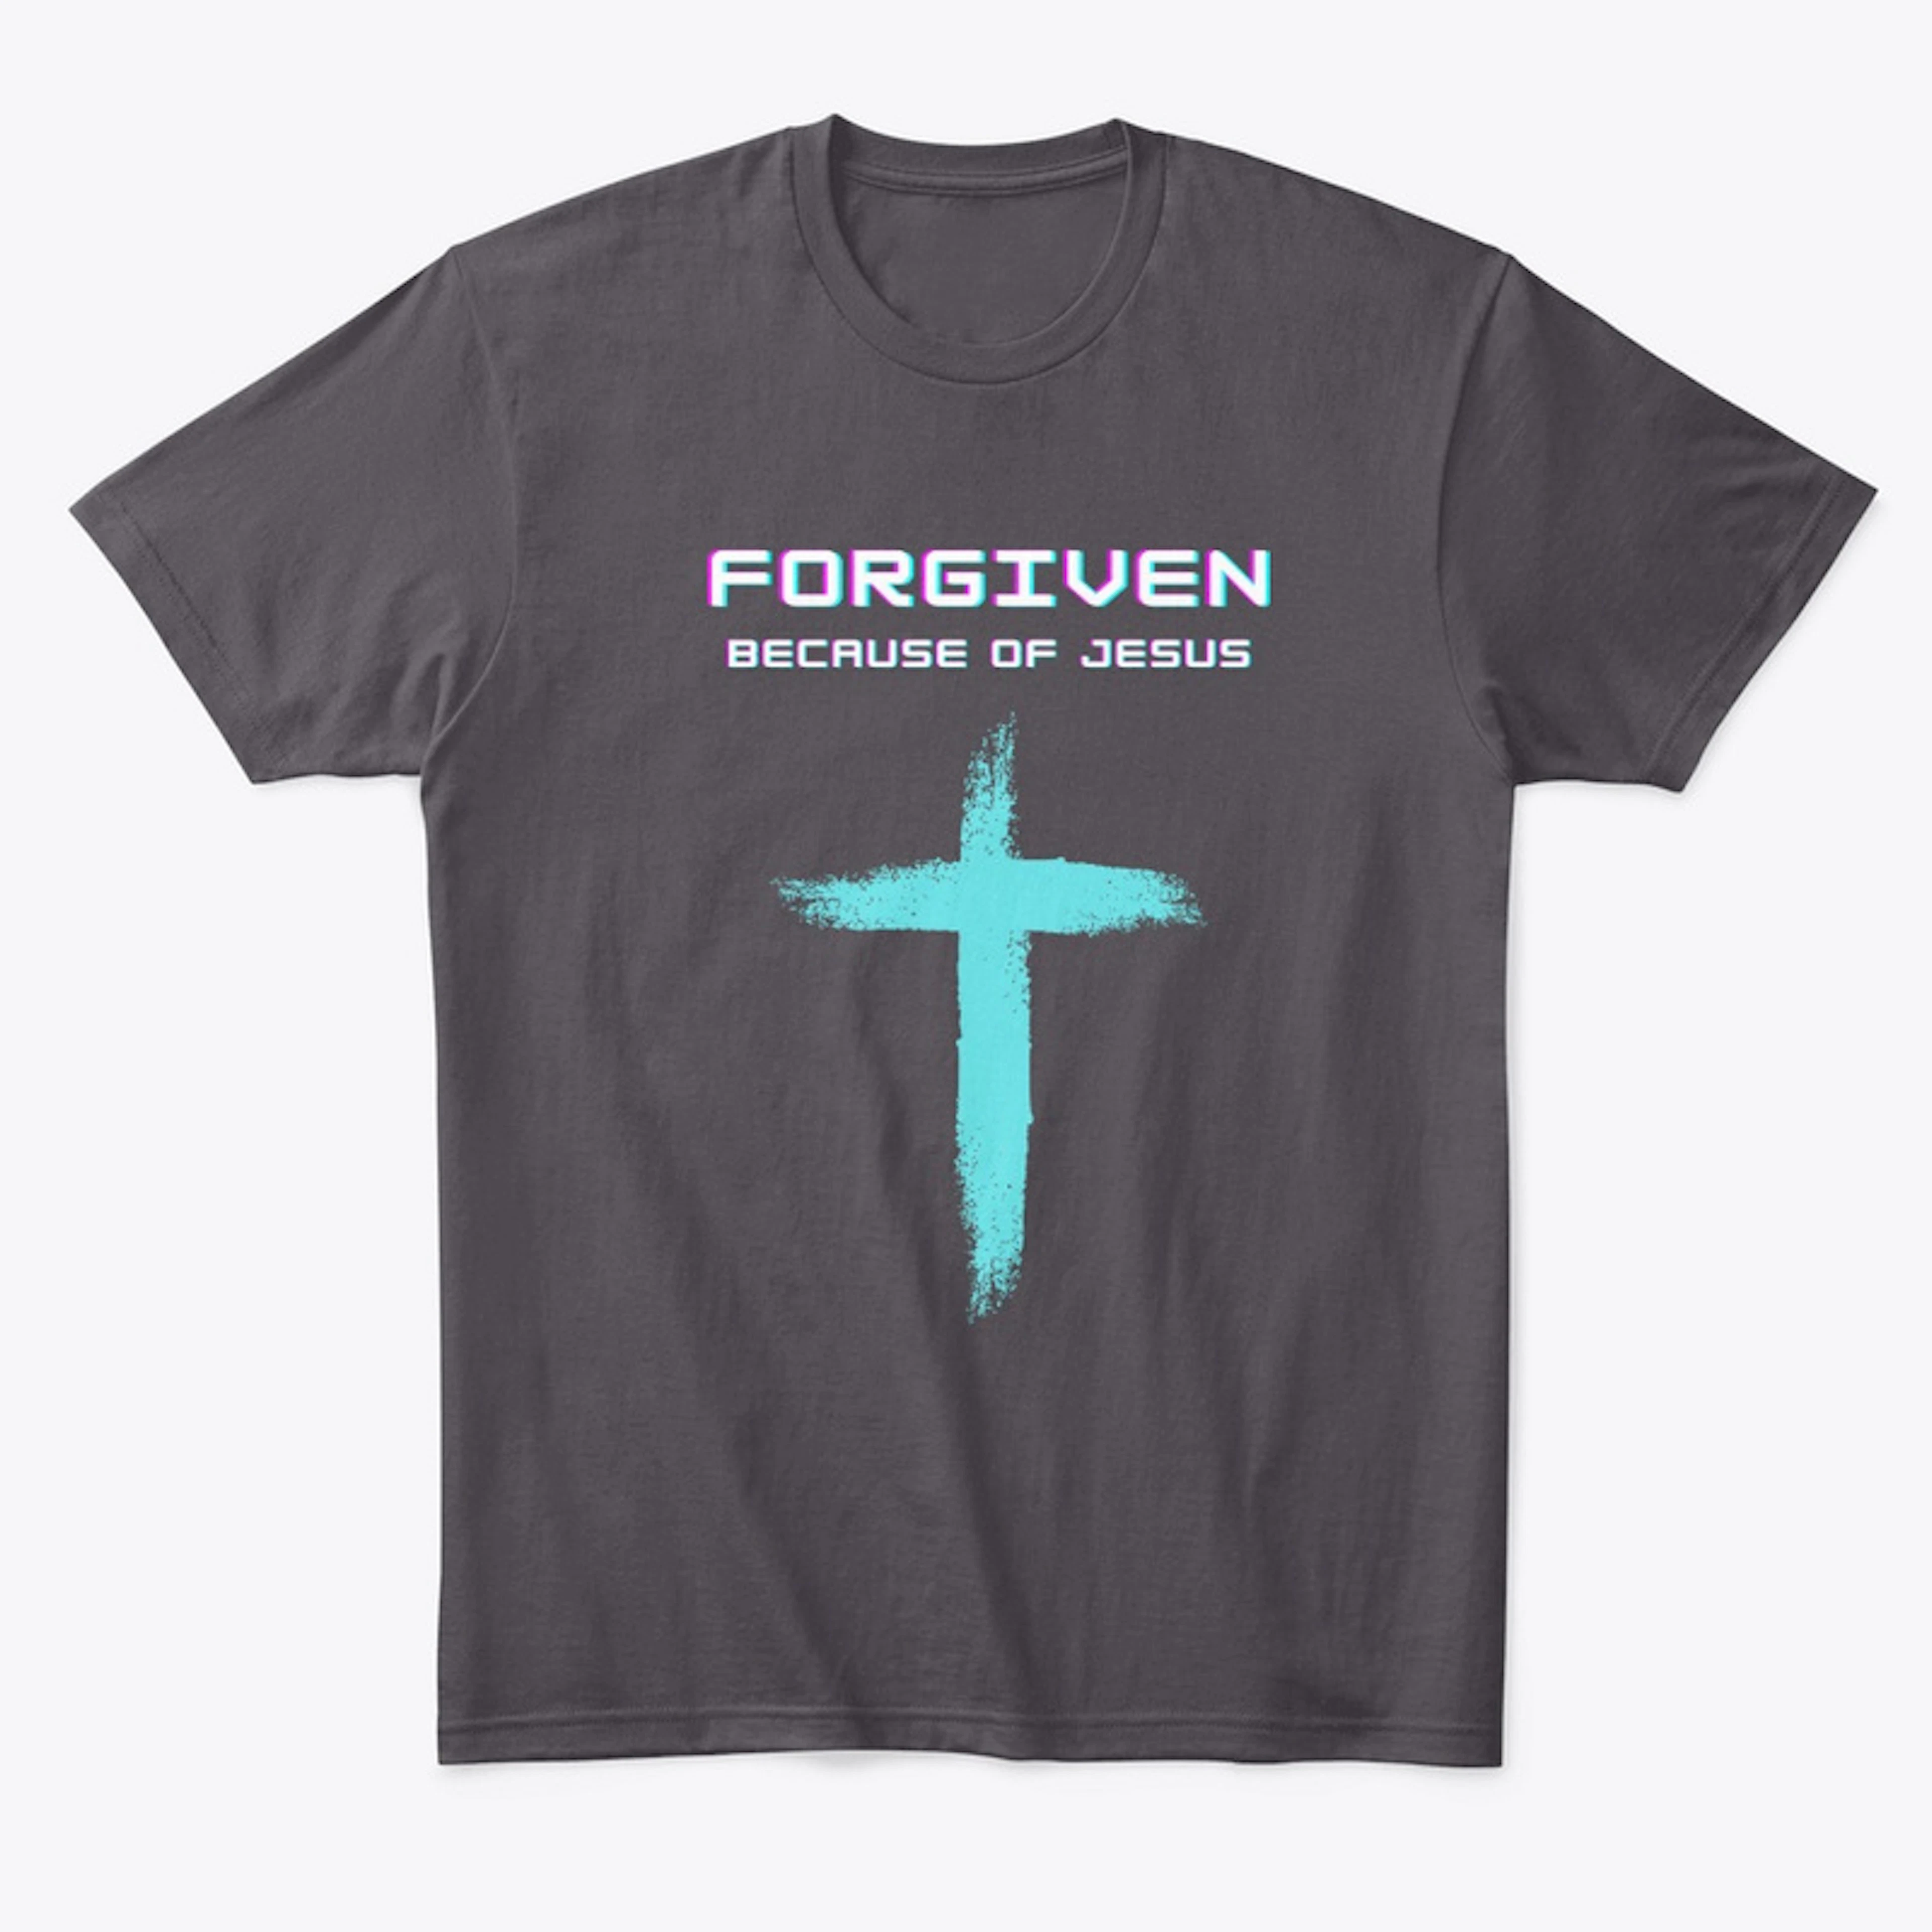 Forgiven because of Jesus